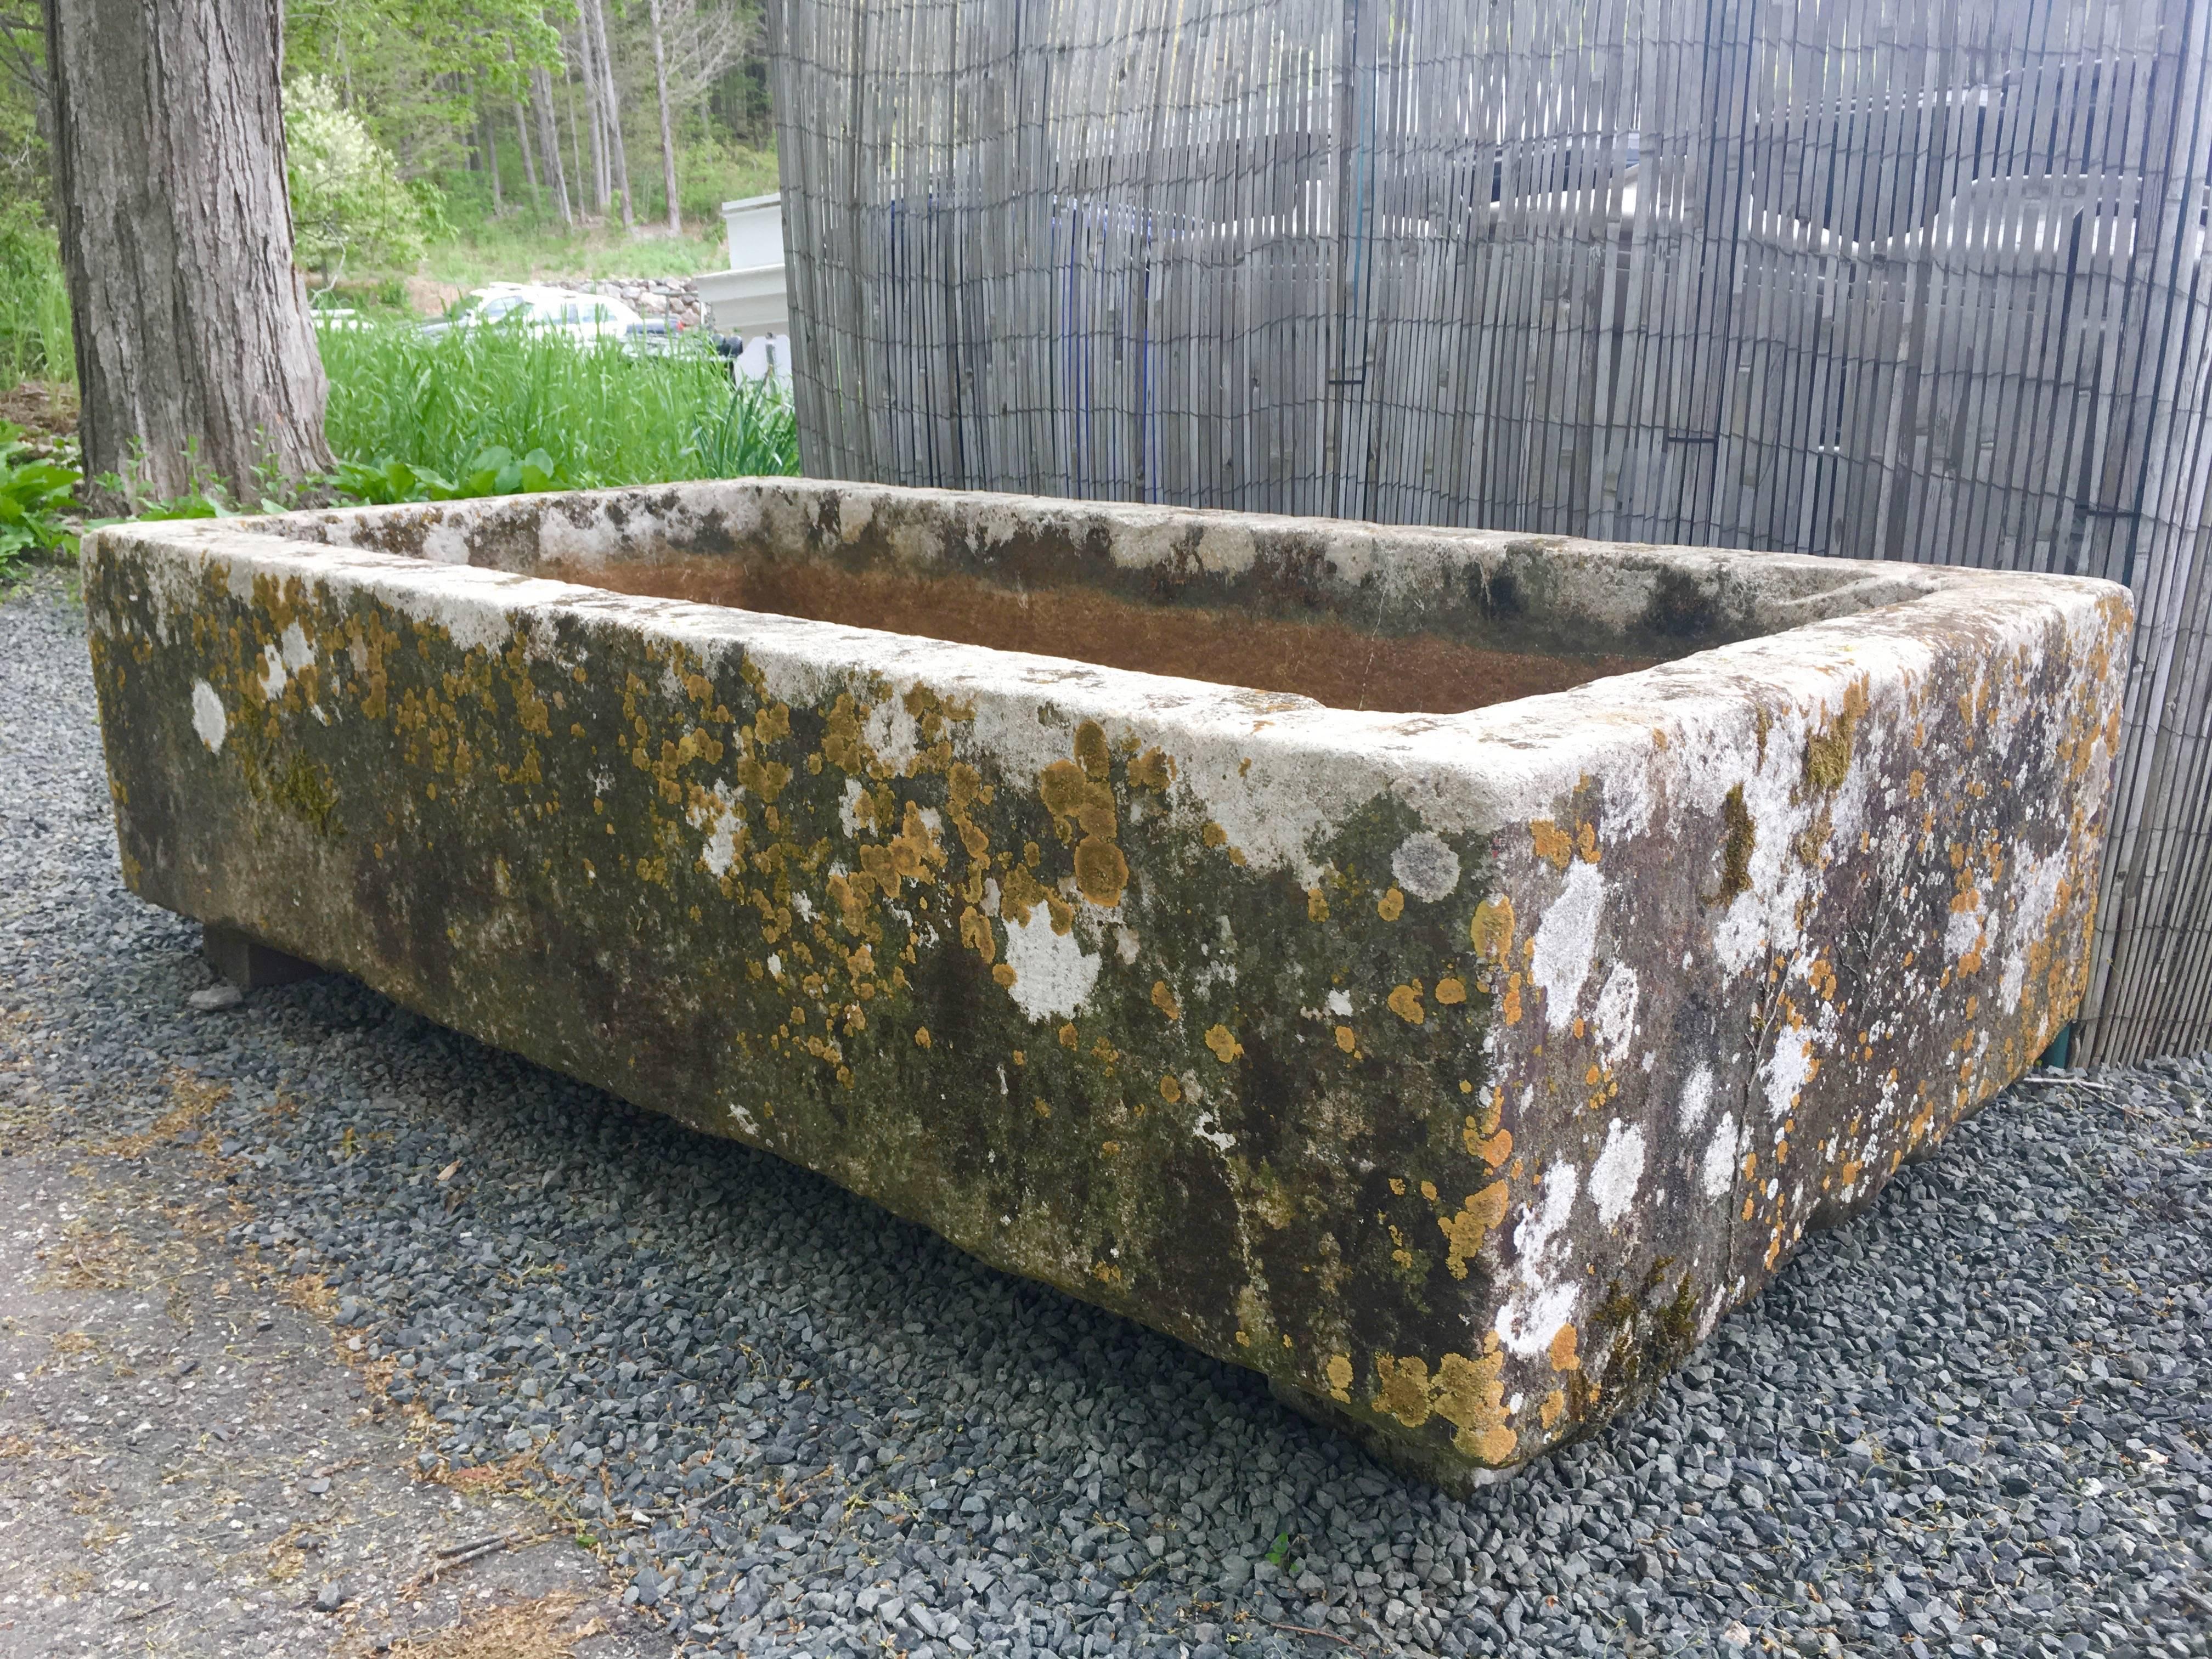 This very large hand-carved stone trough is a beauty! Its condition is impeccable and the patina is exceptional, with over 200 years of accumulated white, pale green and orange lichen. Its size and presence would make for a wonderful water feature